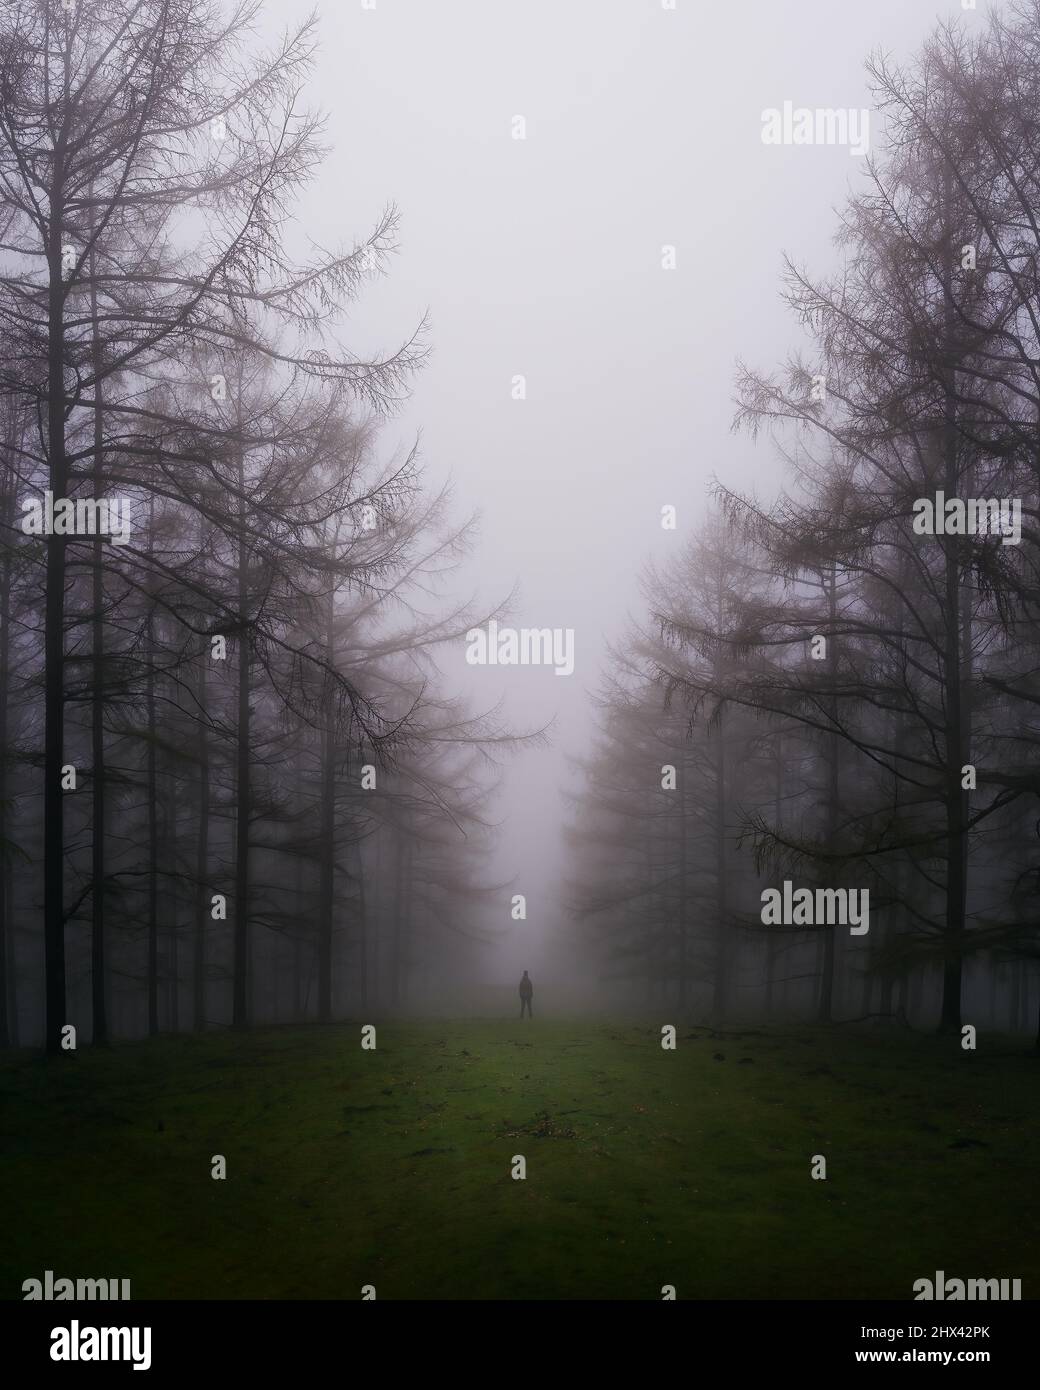 Man in a foggy forest Stock Photo